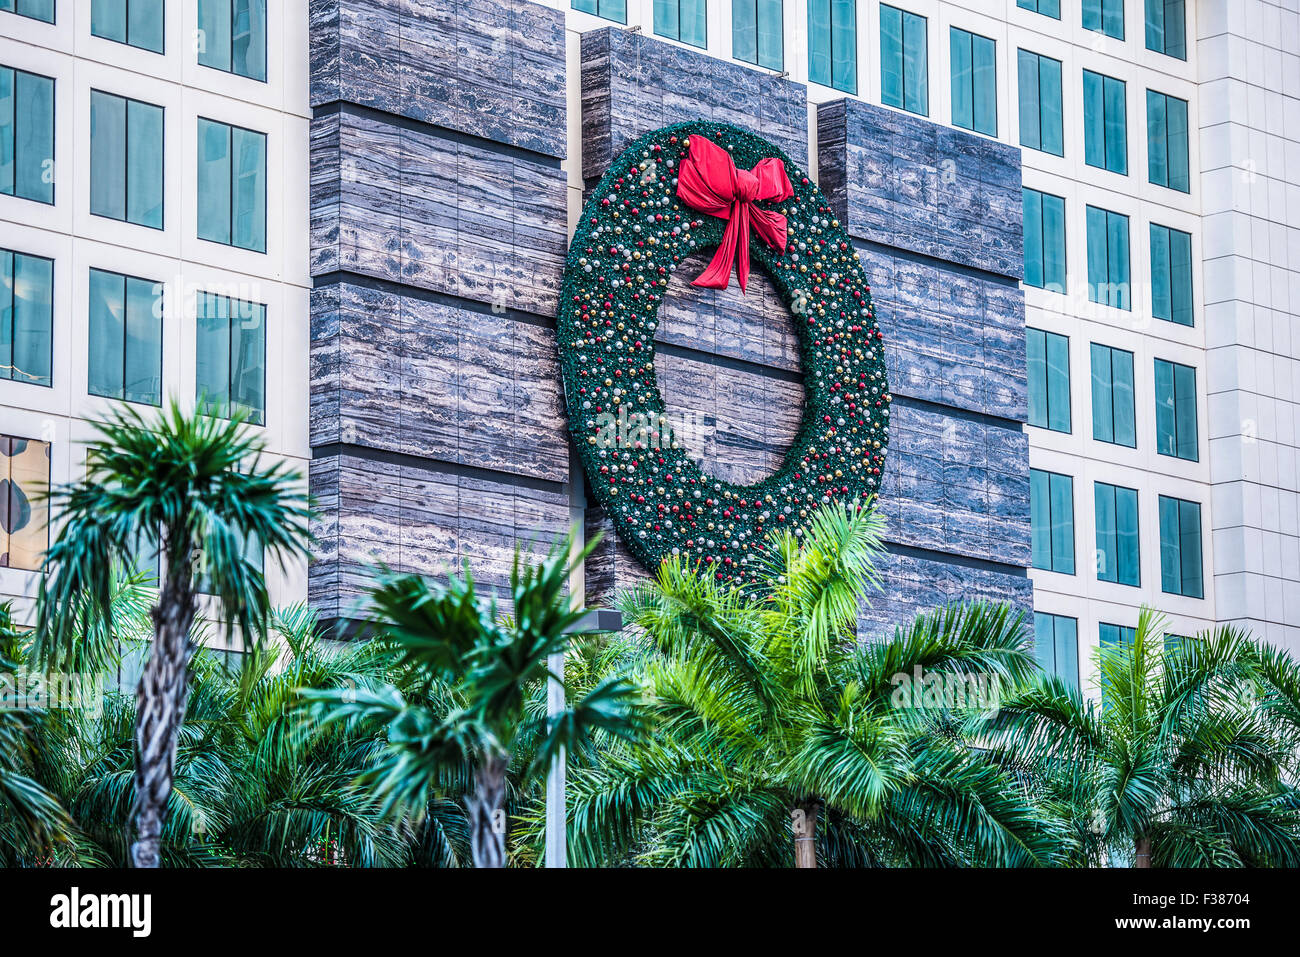 Florida Miami DownTown Christmas decoration in Brickell Ave Stock Photo